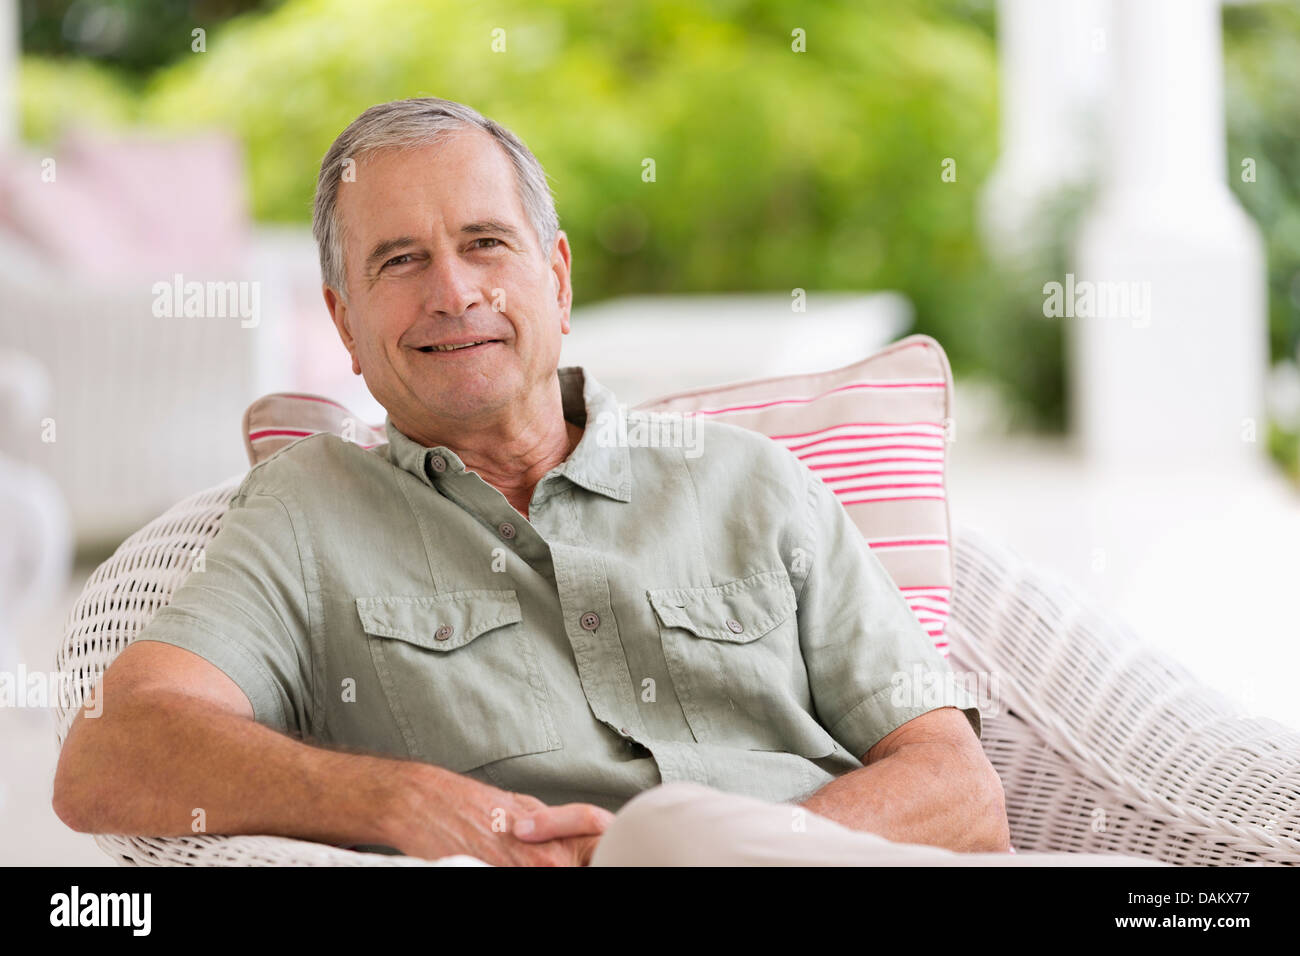 Older man sitting in armchair outdoors Stock Photo